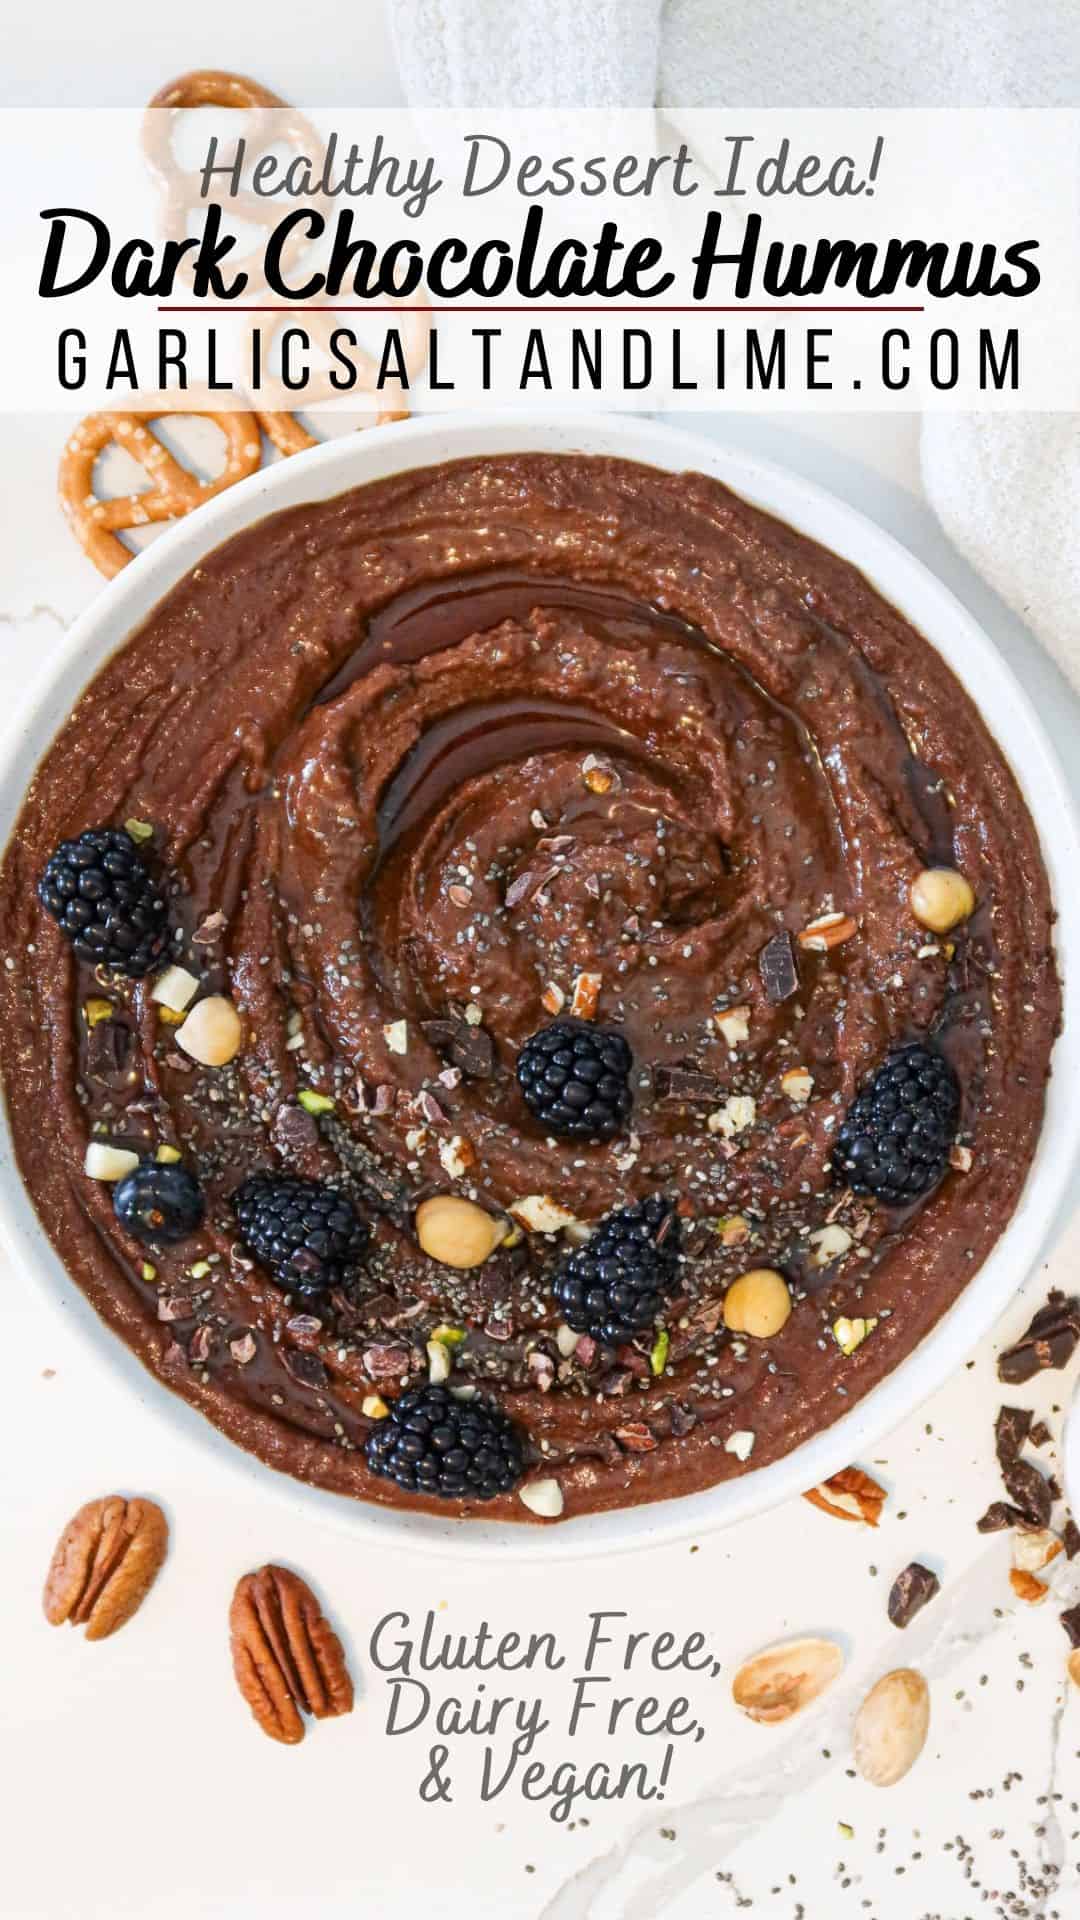 Chocolate hummus in a serving bowl with text overlay for Pinterest.